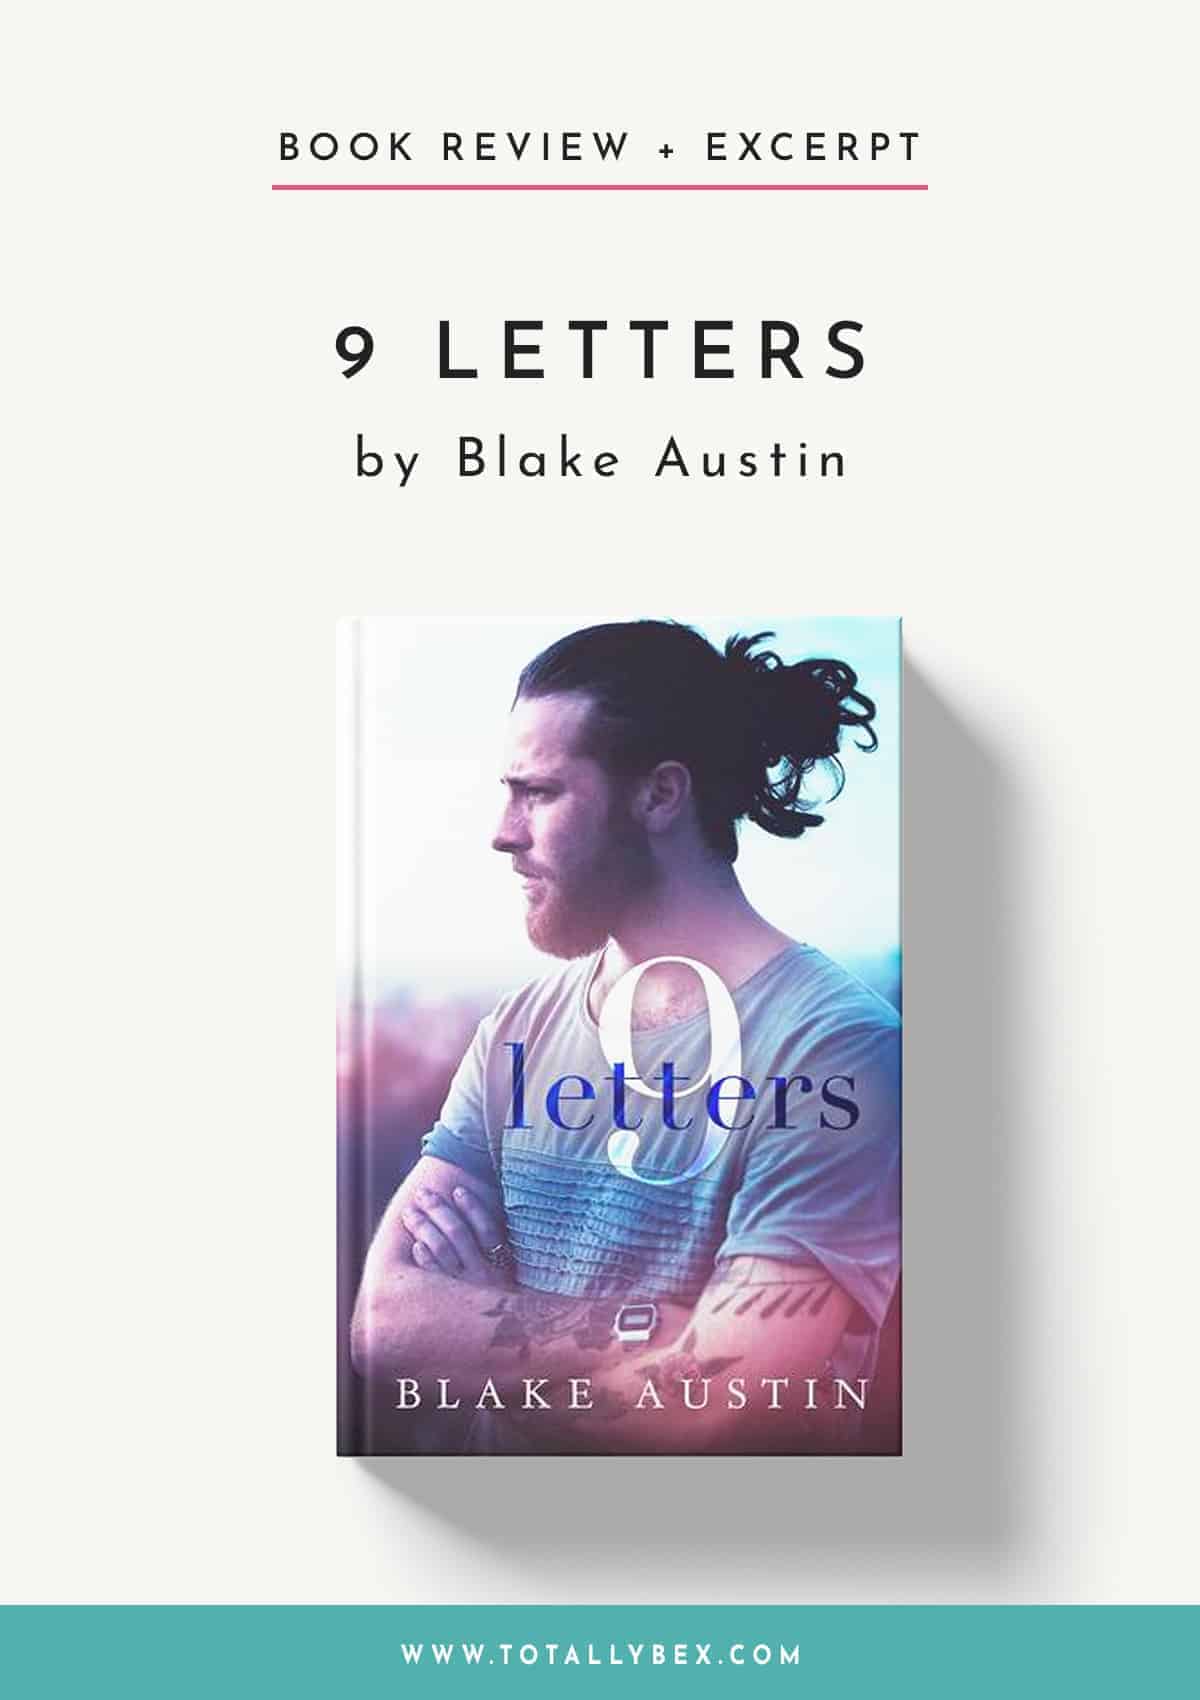 Nine Letters by Blake Austin-Book Review+Excerpt